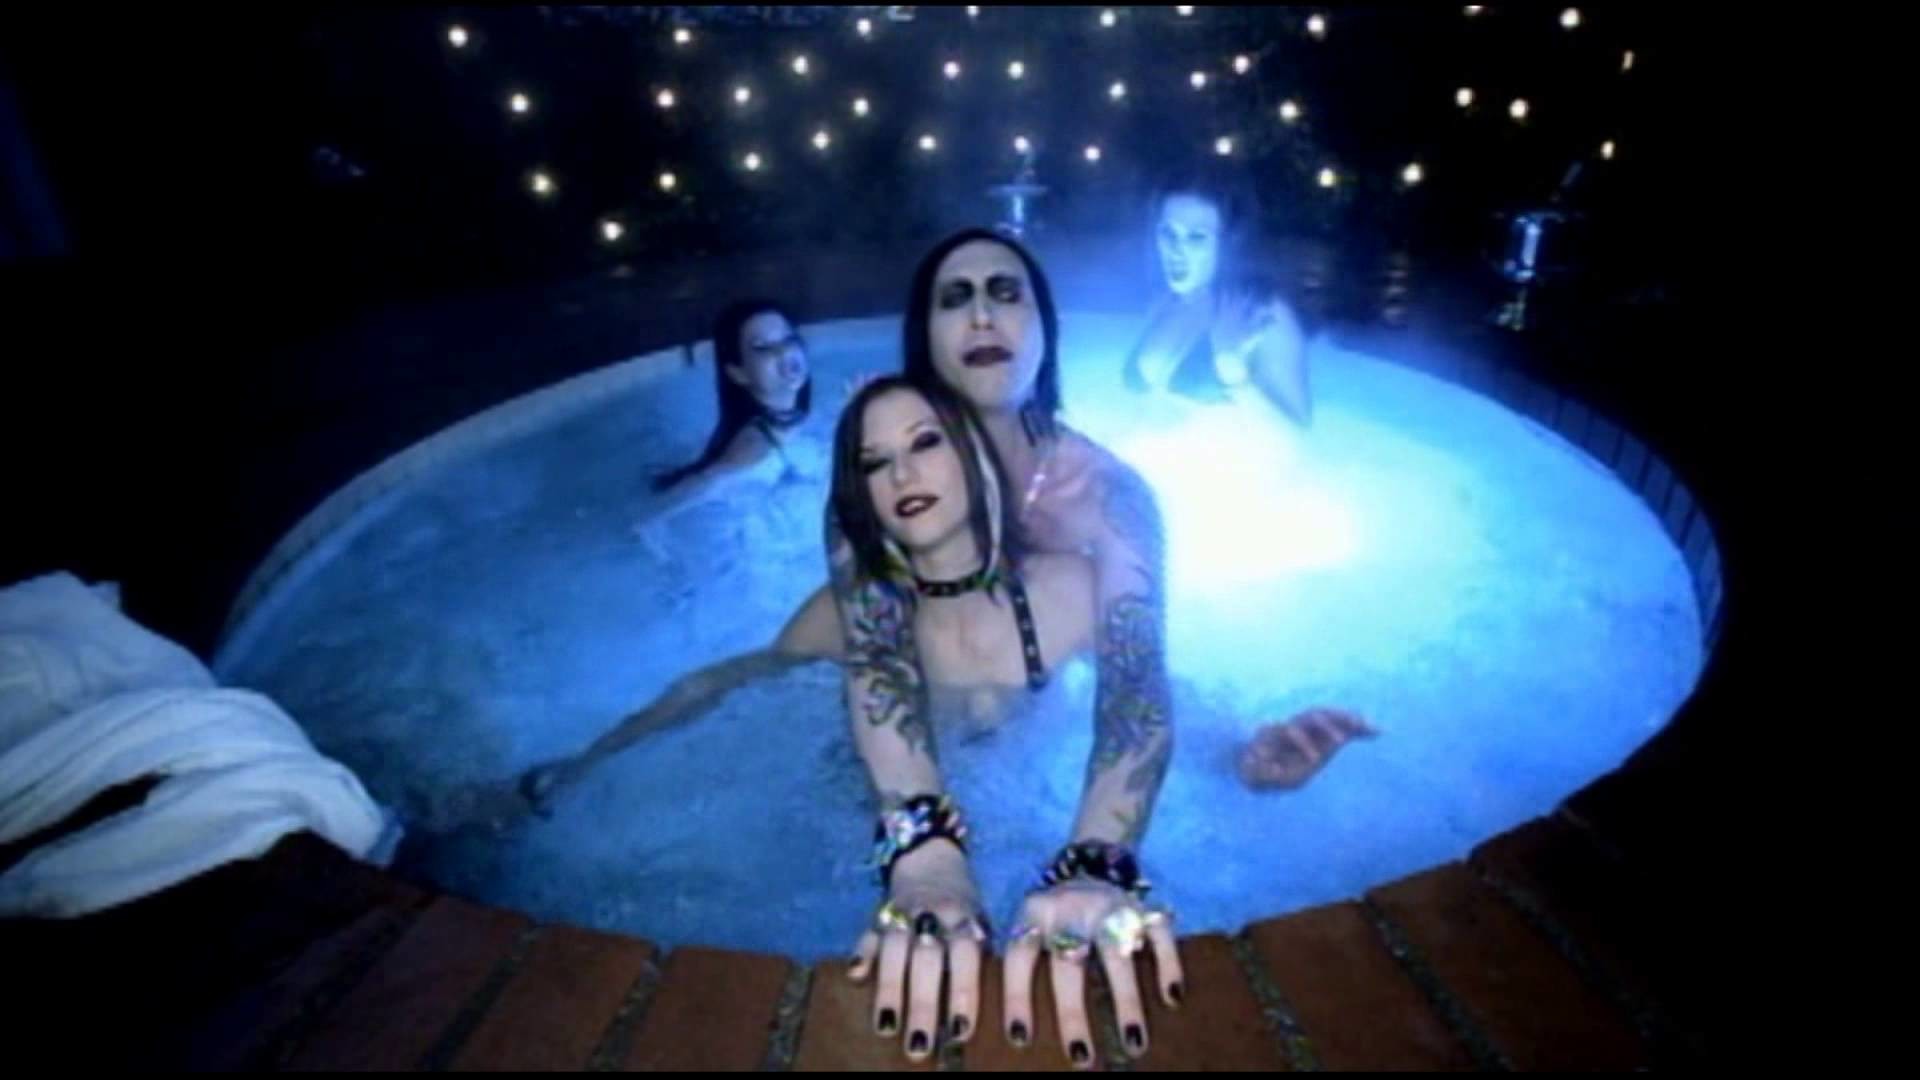 1920x1080 Marilyn Manson - Tainted Love Uncensored HD (The best quality on YouTube)